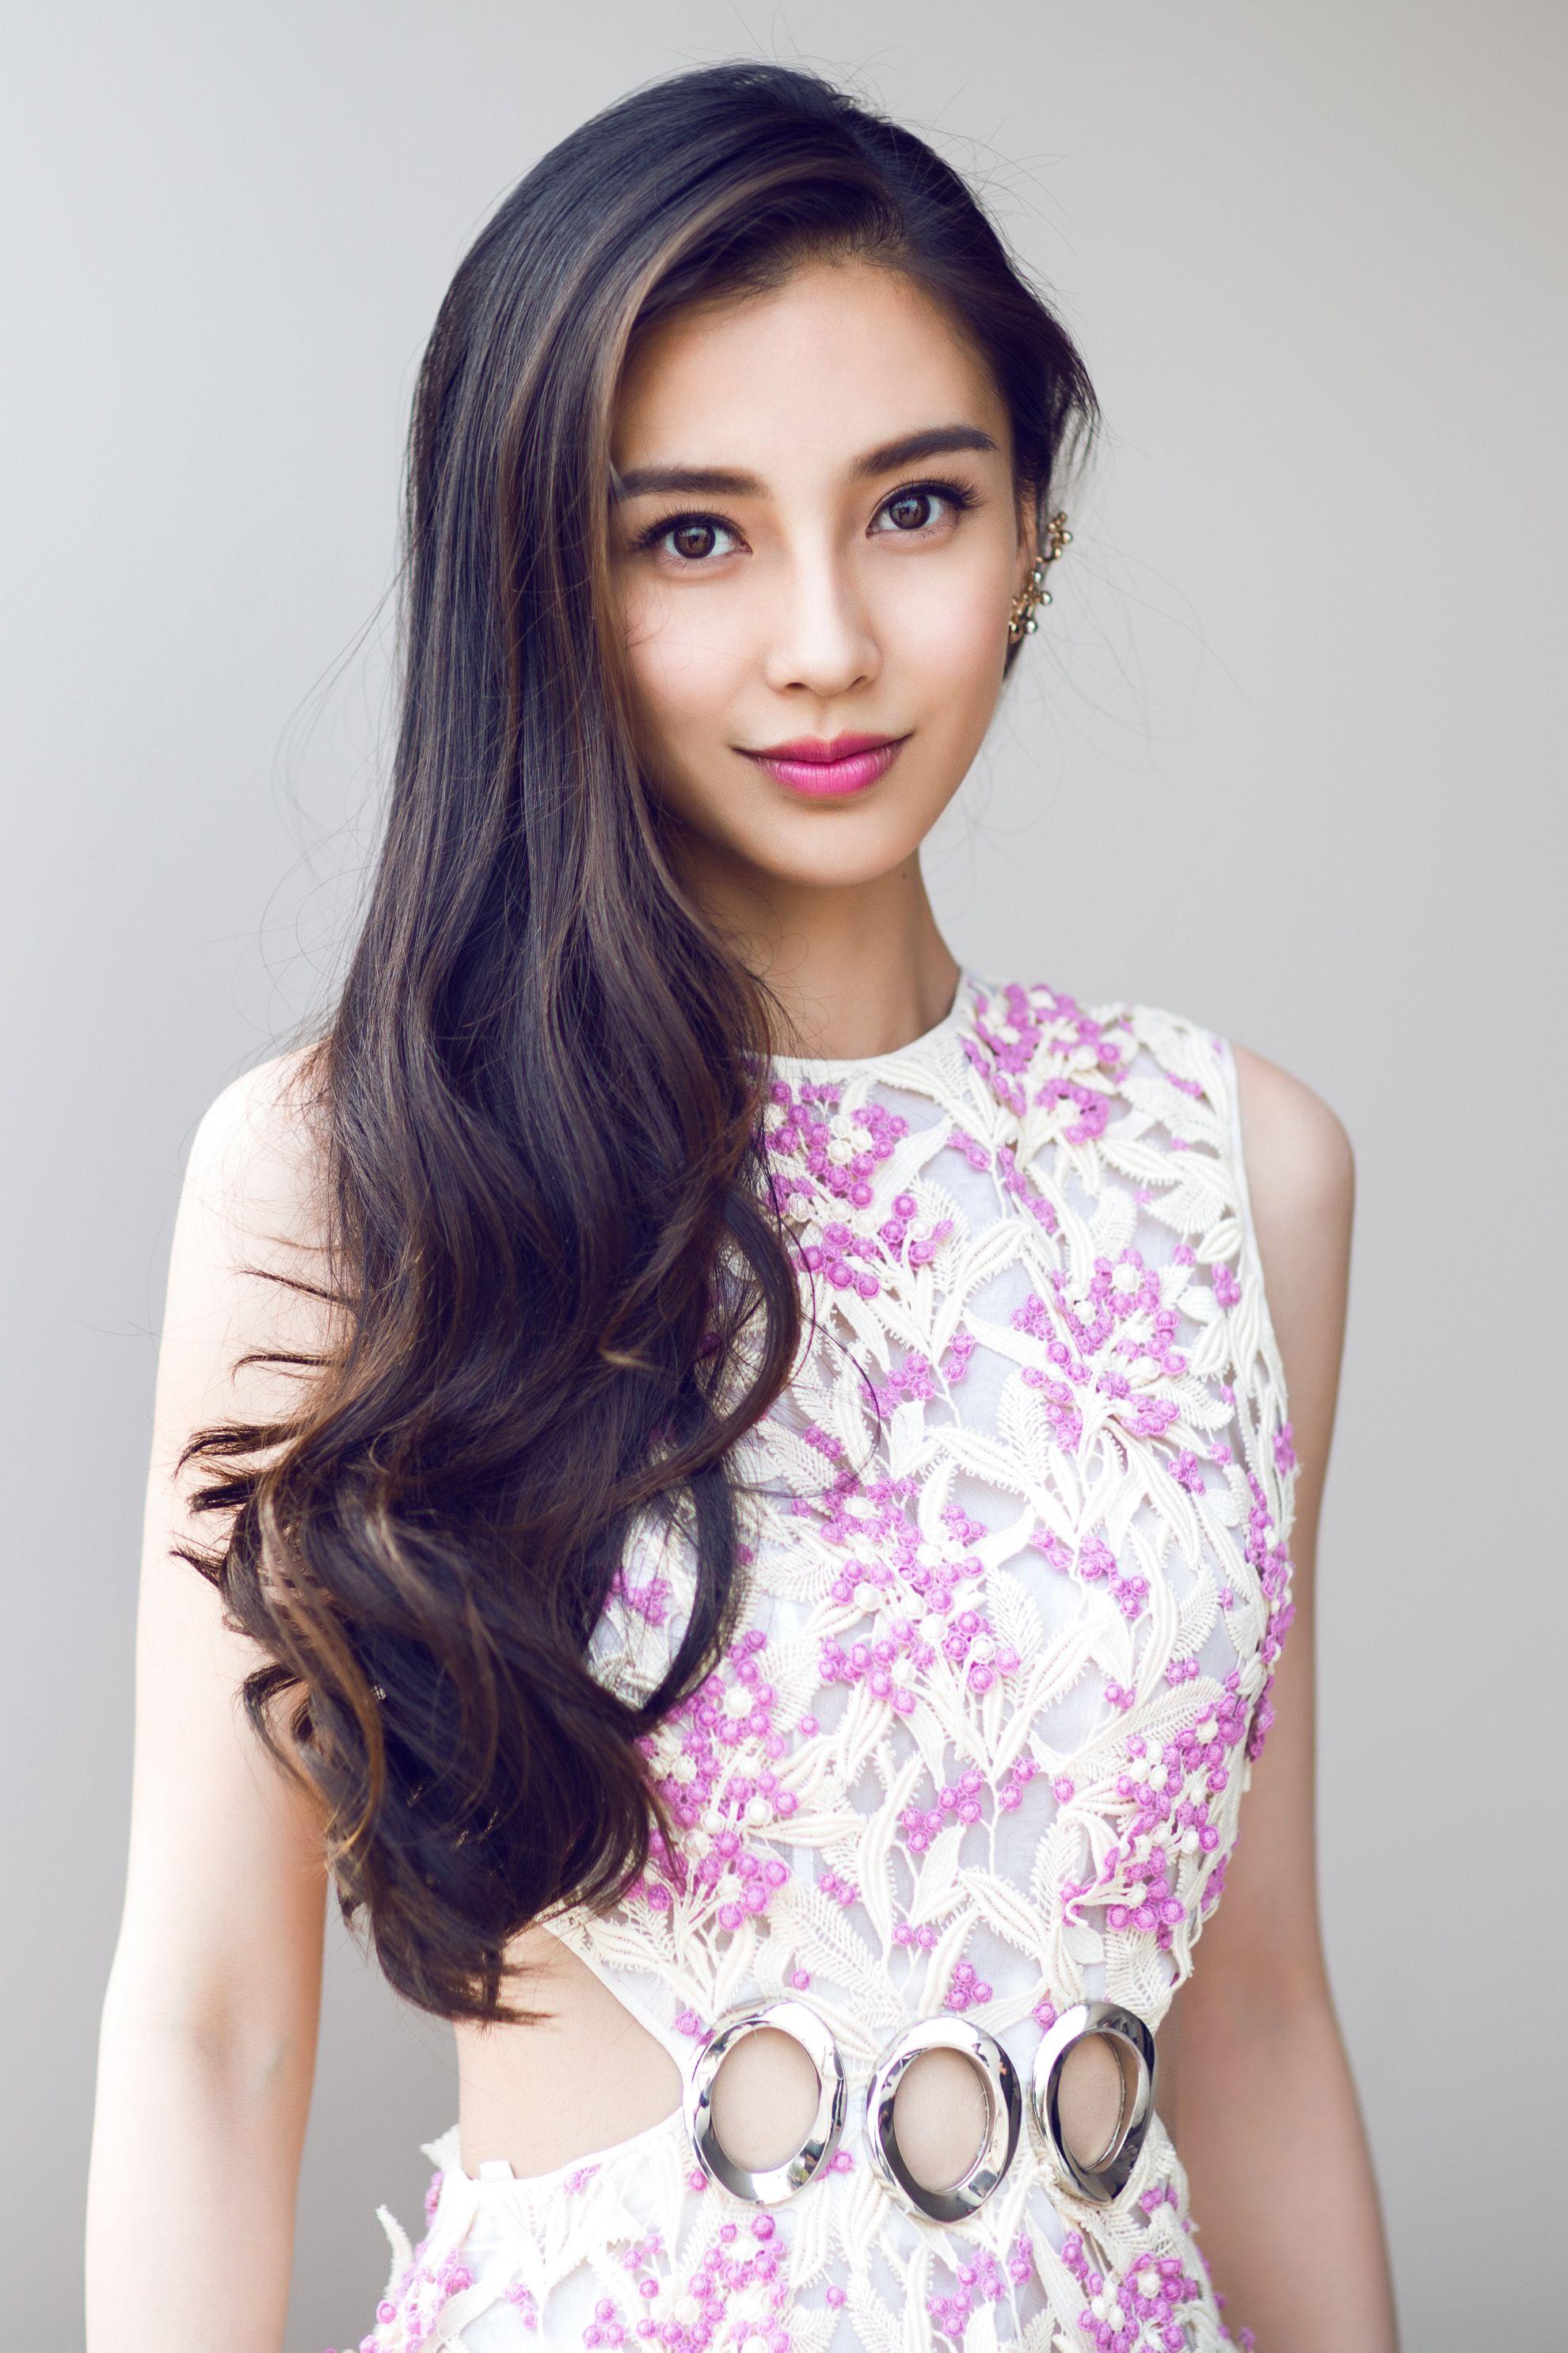 Chinese Star Angelababy Signs With Hollywood Agency UTA.